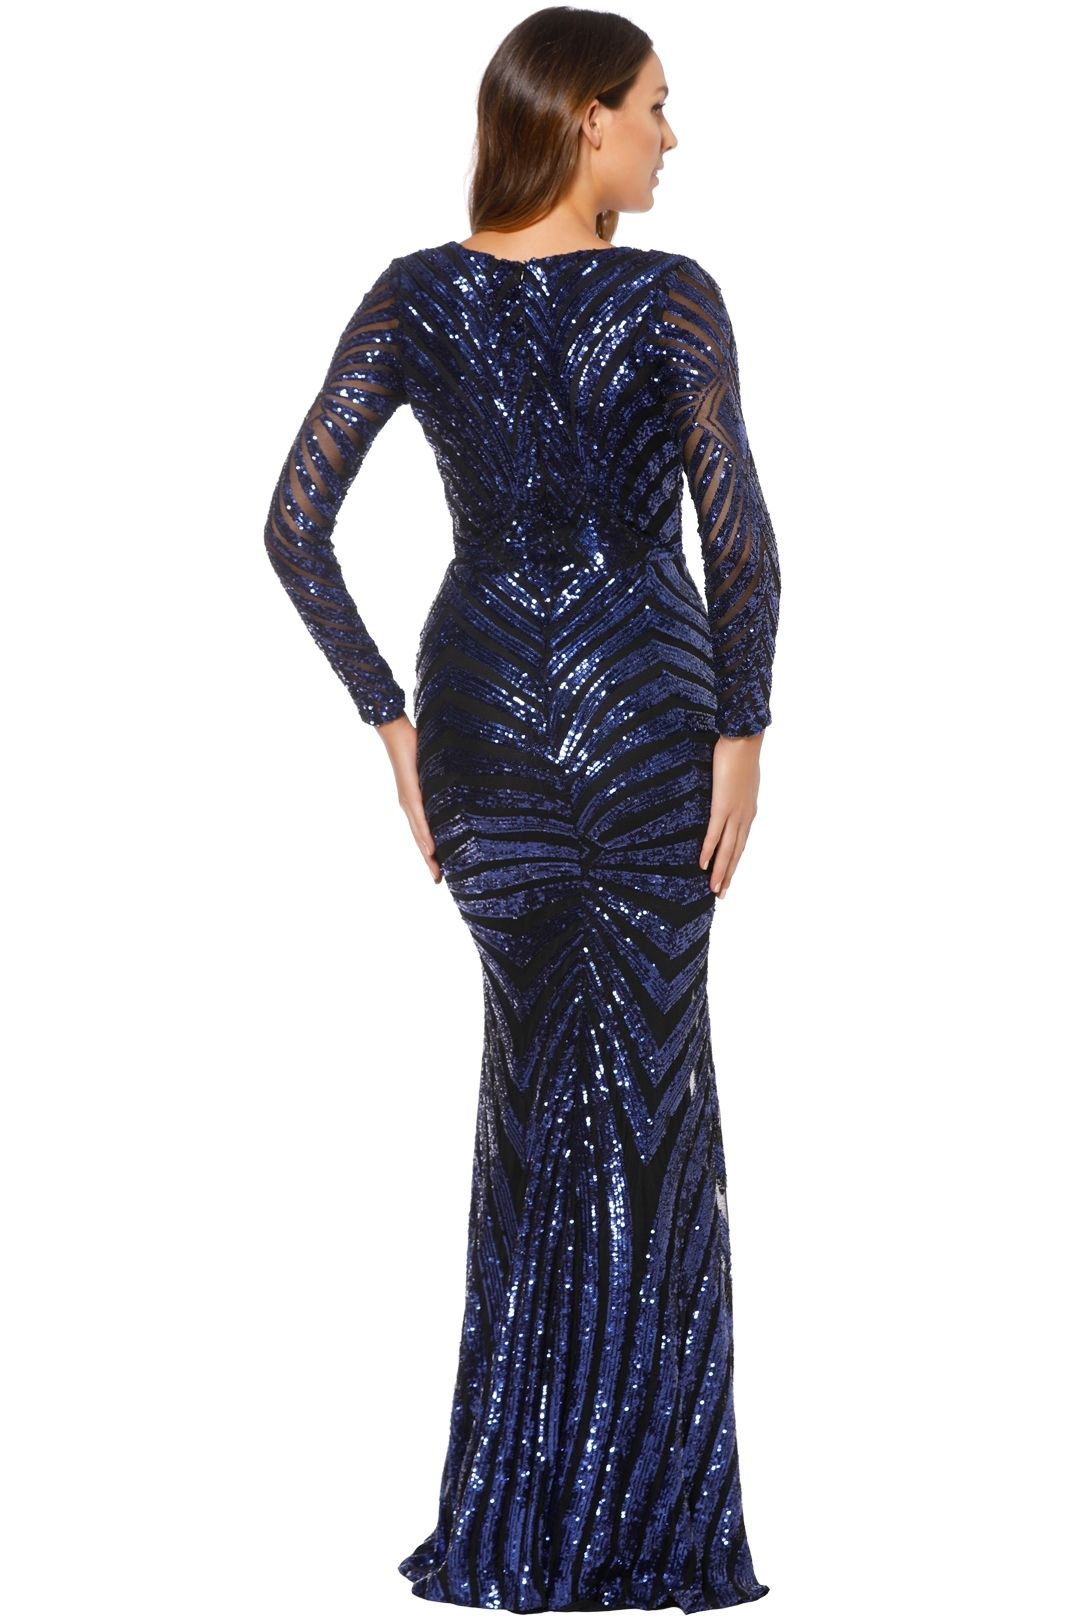 Ae'lkemi - Art Deco Sequin Gown - Navy - Back